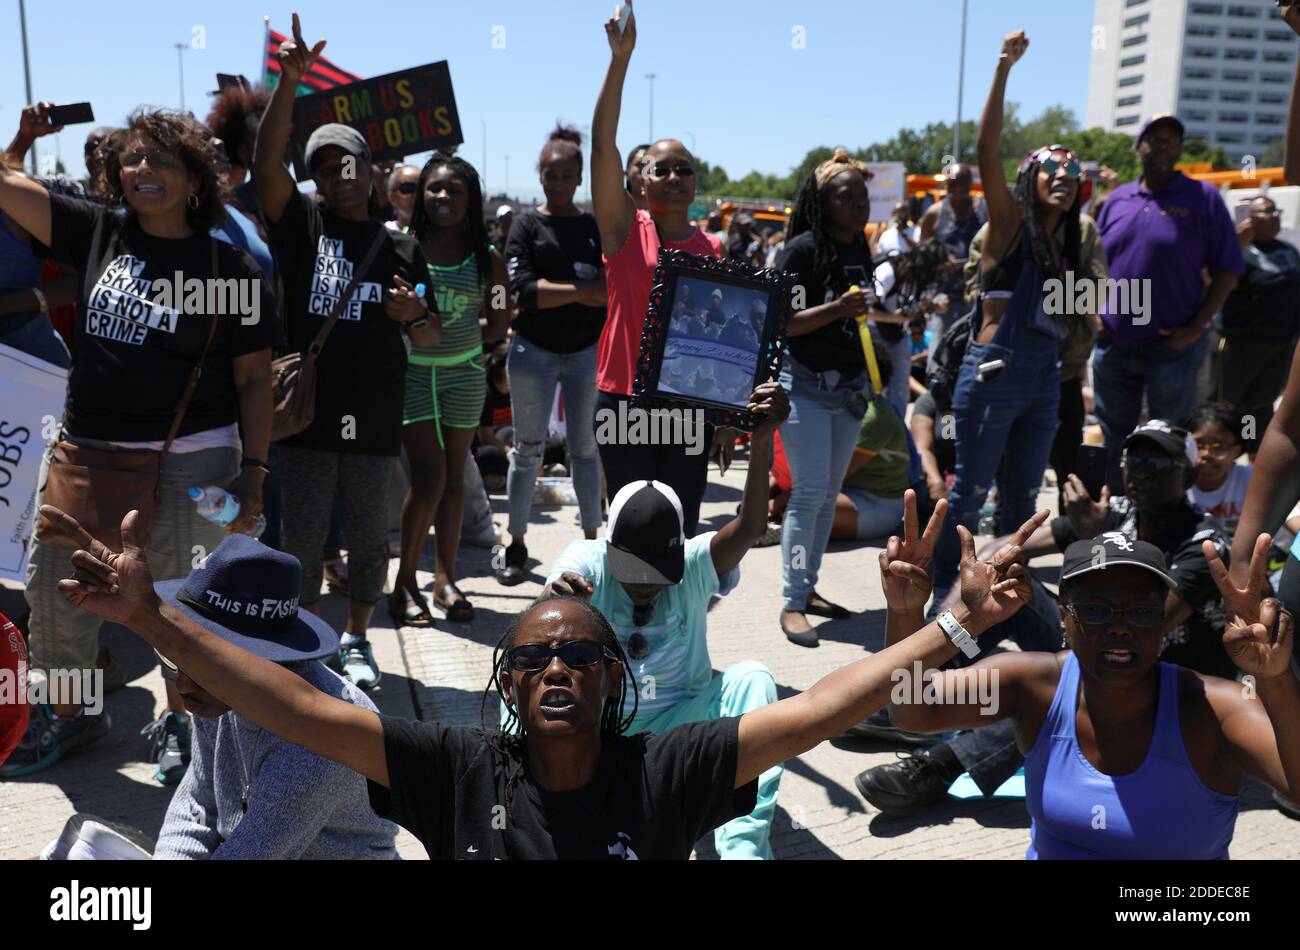 NO FILM, NO VIDEO, NO TV, NO DOCUMENTARY - Thousands of protesters on the Dan Ryan Expressway in Chicago, IL, USA after blocking the transportation artery in an anti-violence march on Saturday, July 7, 2018. Photo by Abel Uribe/Chicago Tribune/TNS/ABACAPRESS.COM Stock Photo